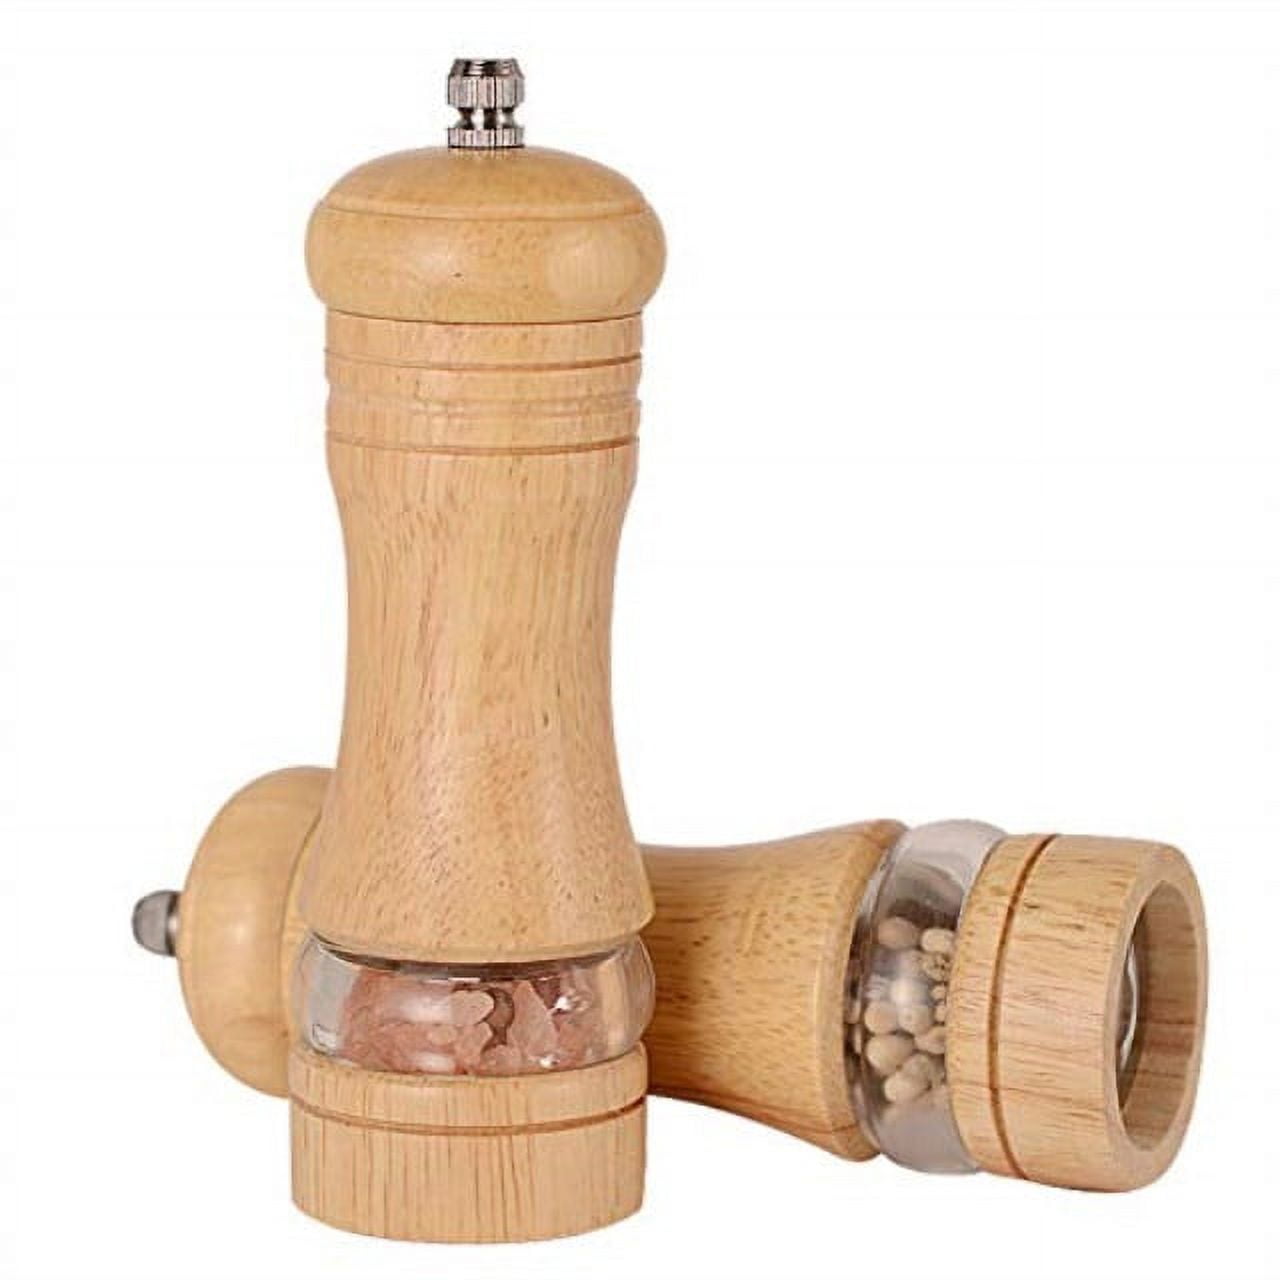 Haomacro Salt and Pepper Grinder Set, Wood Pepper Mills,Wooden Salt  Grinders Refillable Manual Pepper Ginder with Acrylic Visible  Window,Ceramic